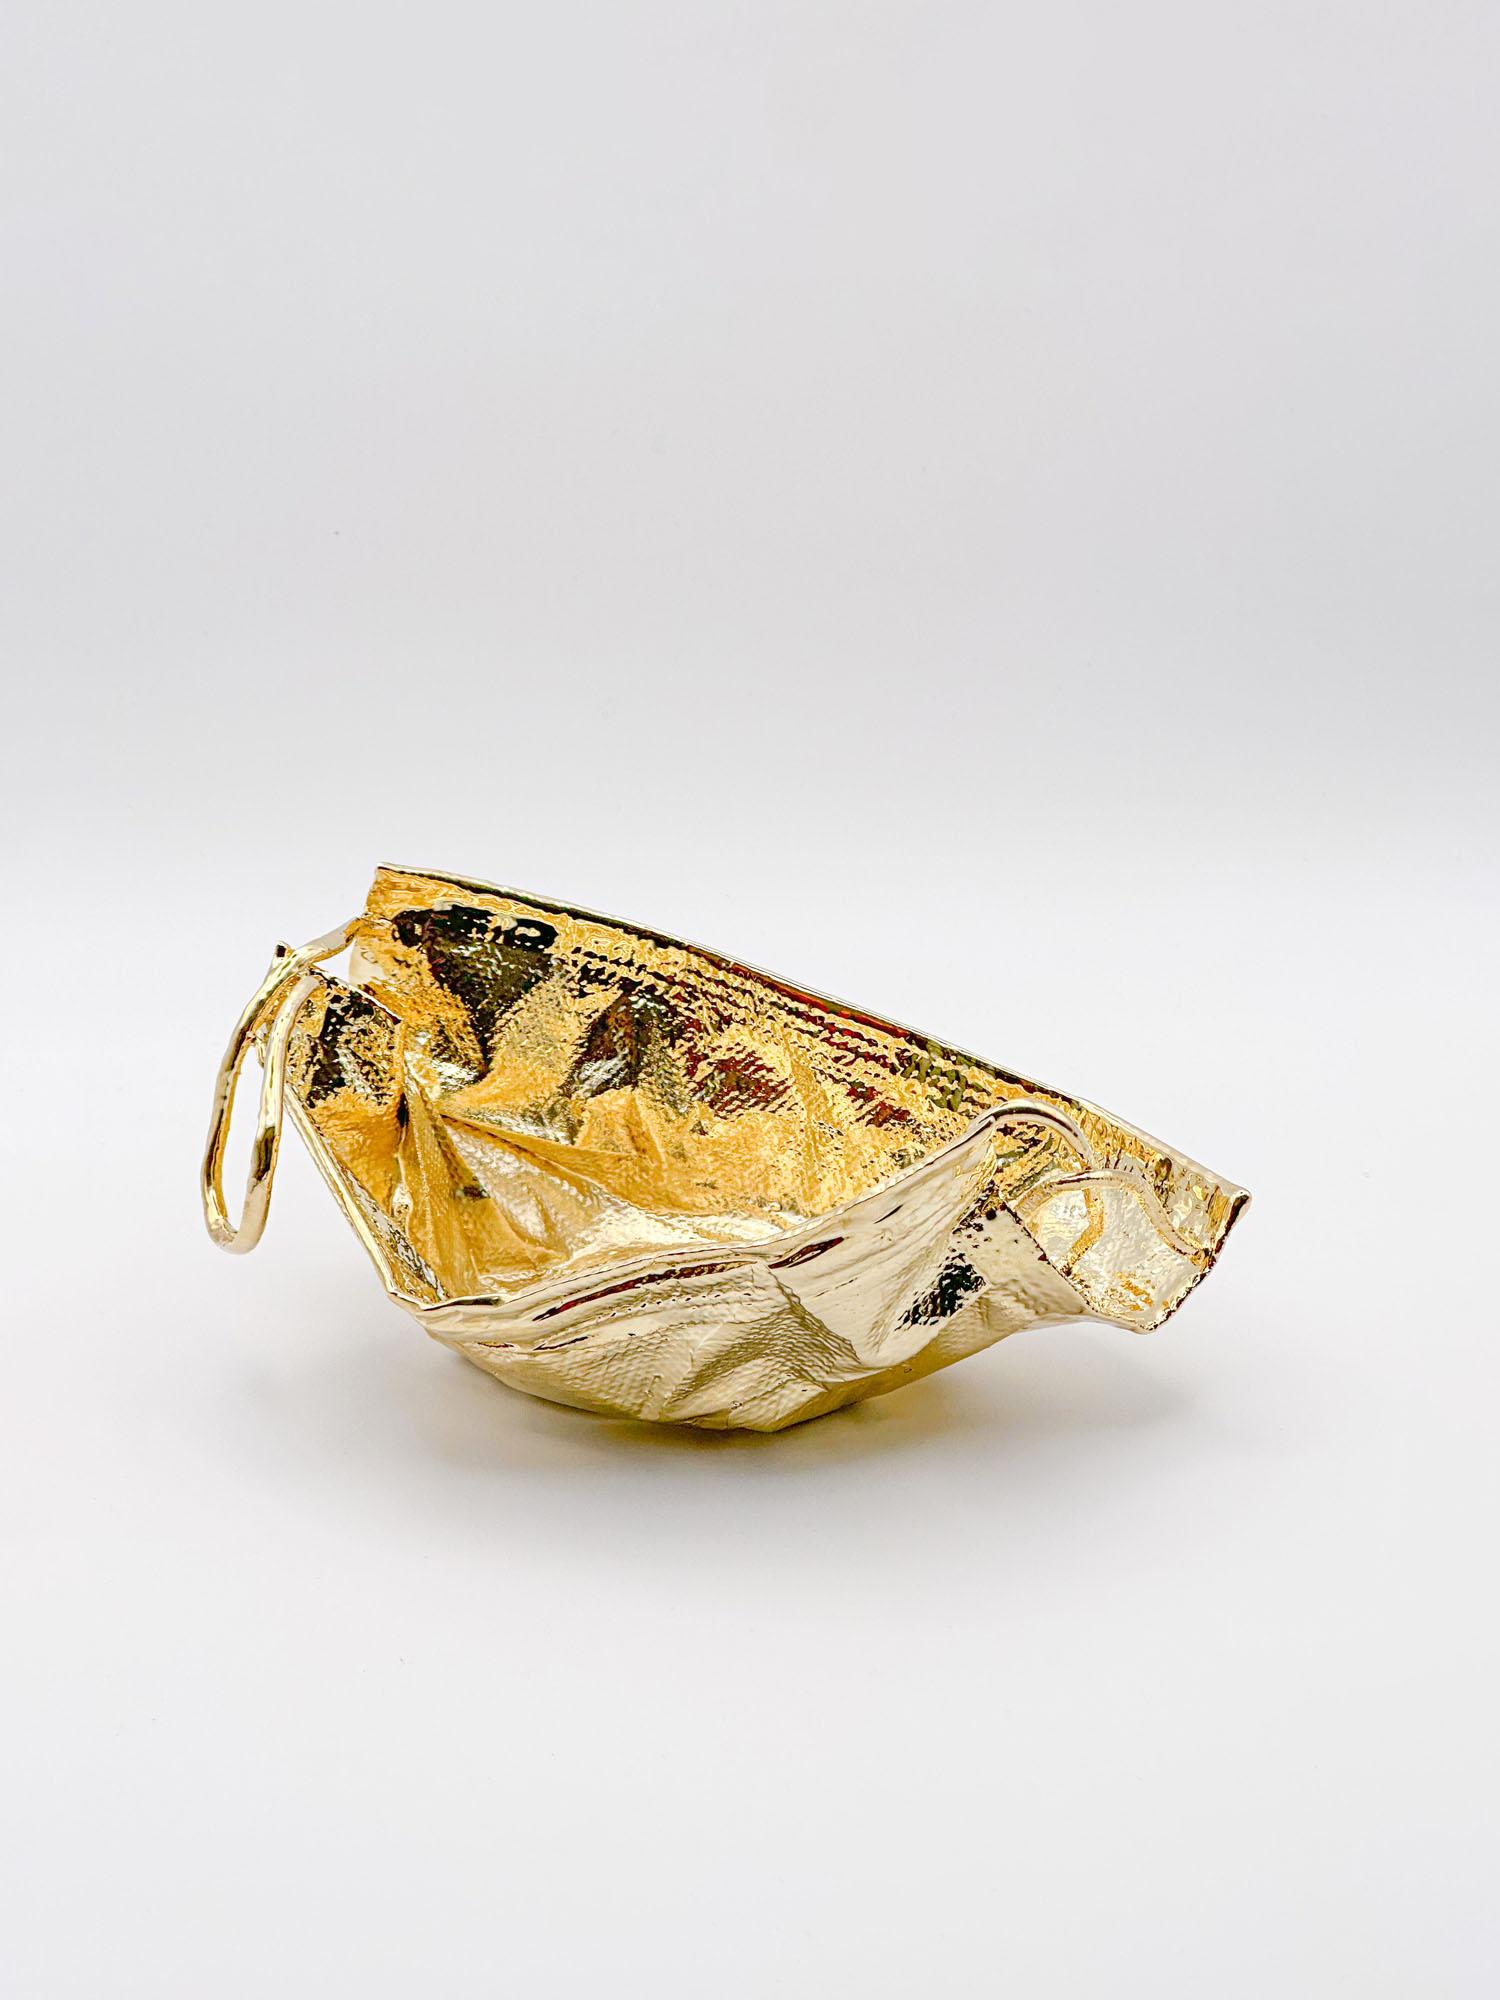 Post-Modern Remask Act 017 Gold Art Object Made from Surgical Mask by Enrico Girotti For Sale